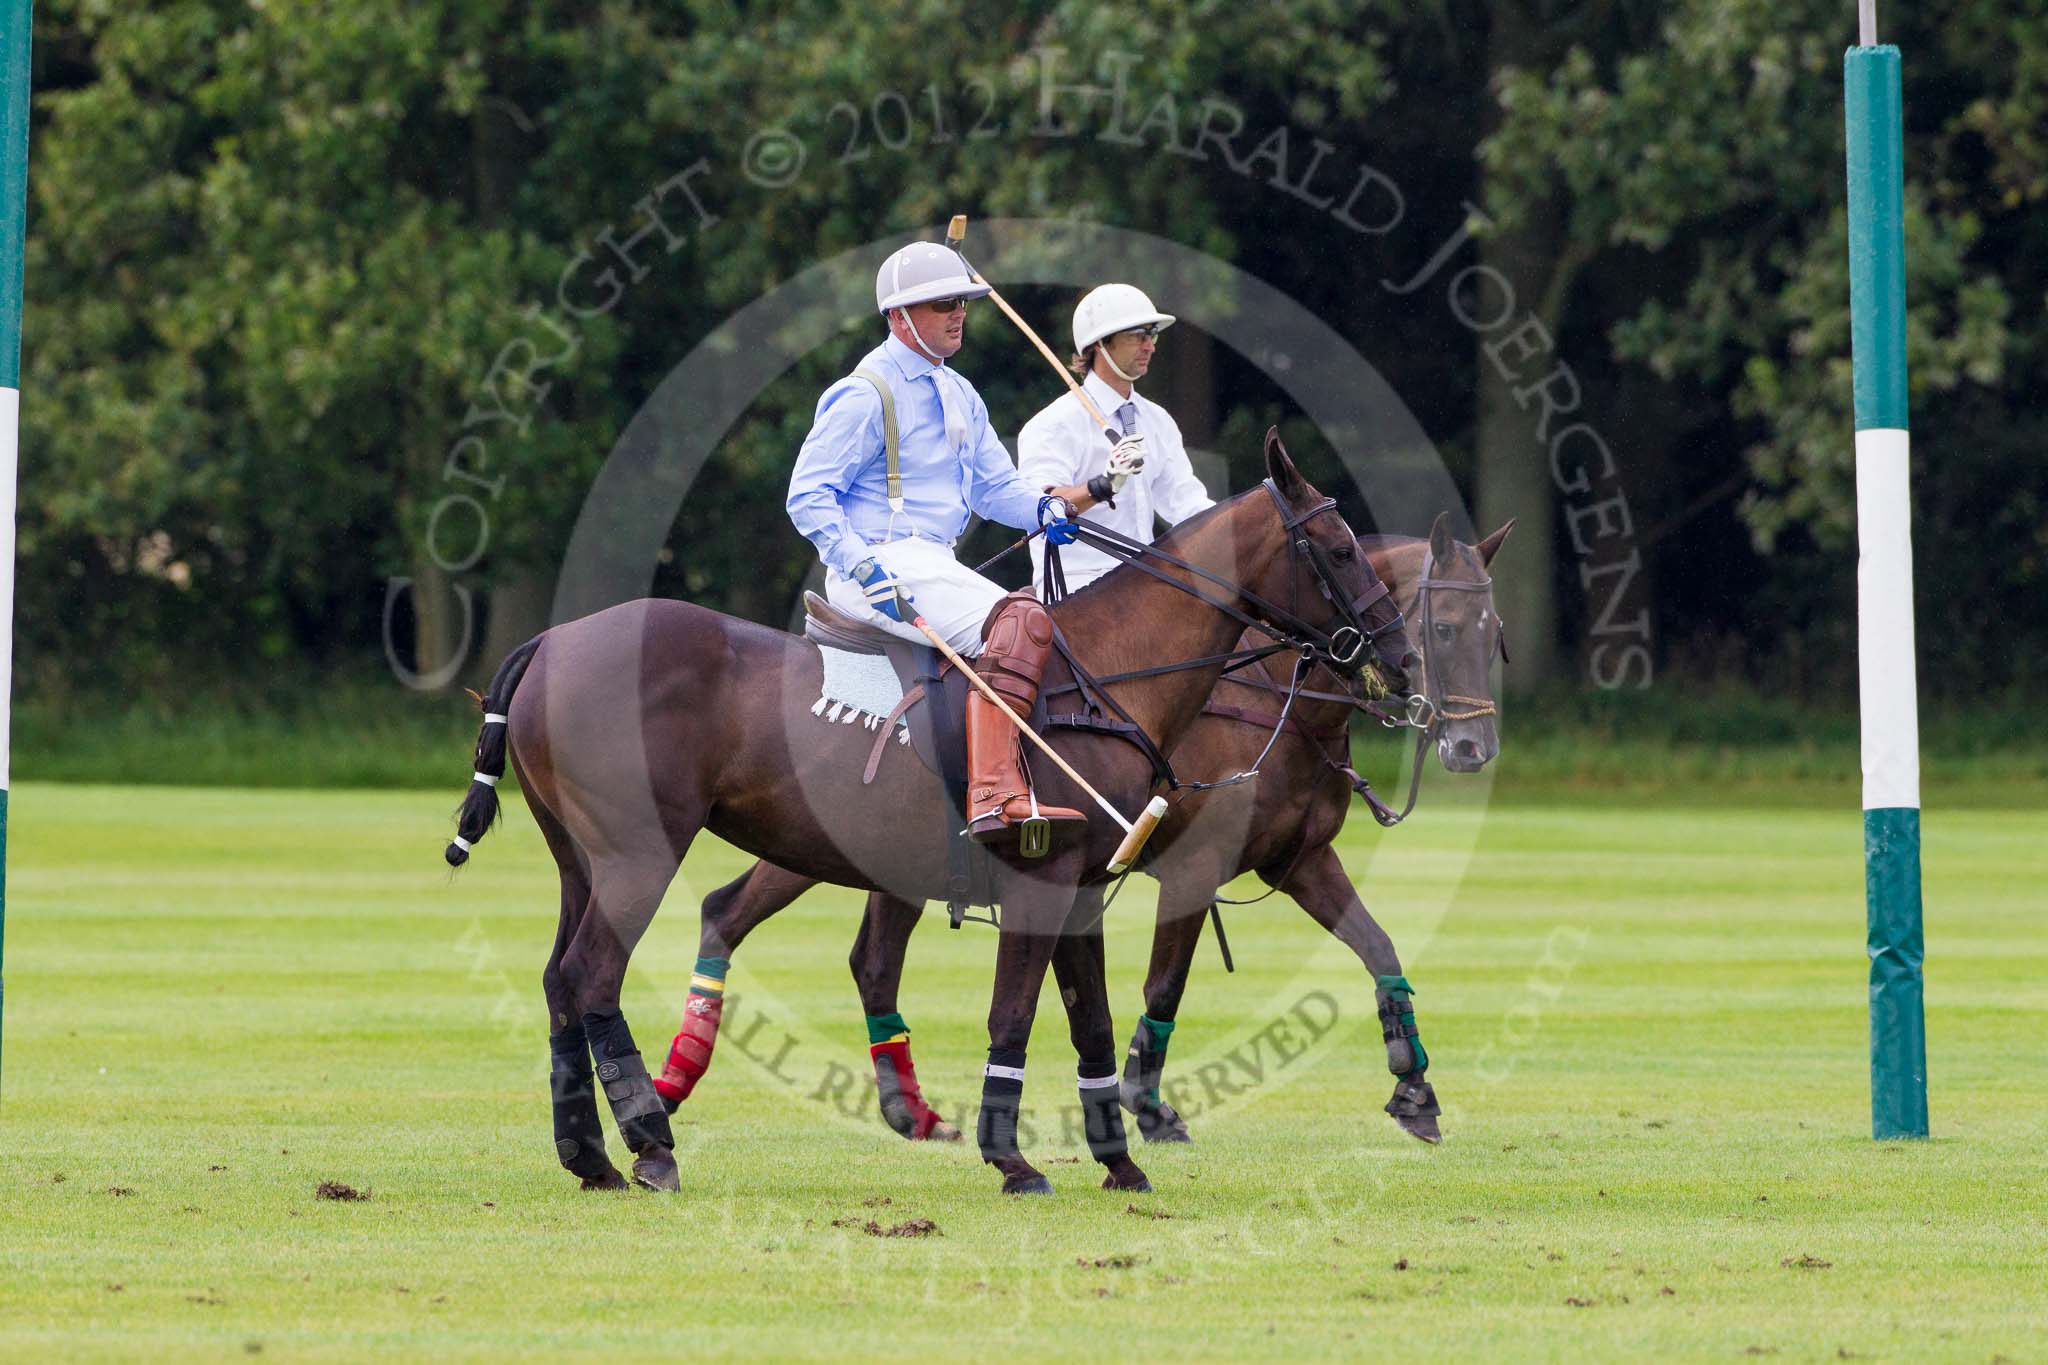 7th Heritage Polo Cup semi-finals: Polo Patron La Mariposa Argentina Timothy Rose..
Hurtwood Park Polo Club,
Ewhurst Green,
Surrey,
United Kingdom,
on 04 August 2012 at 15:39, image #261